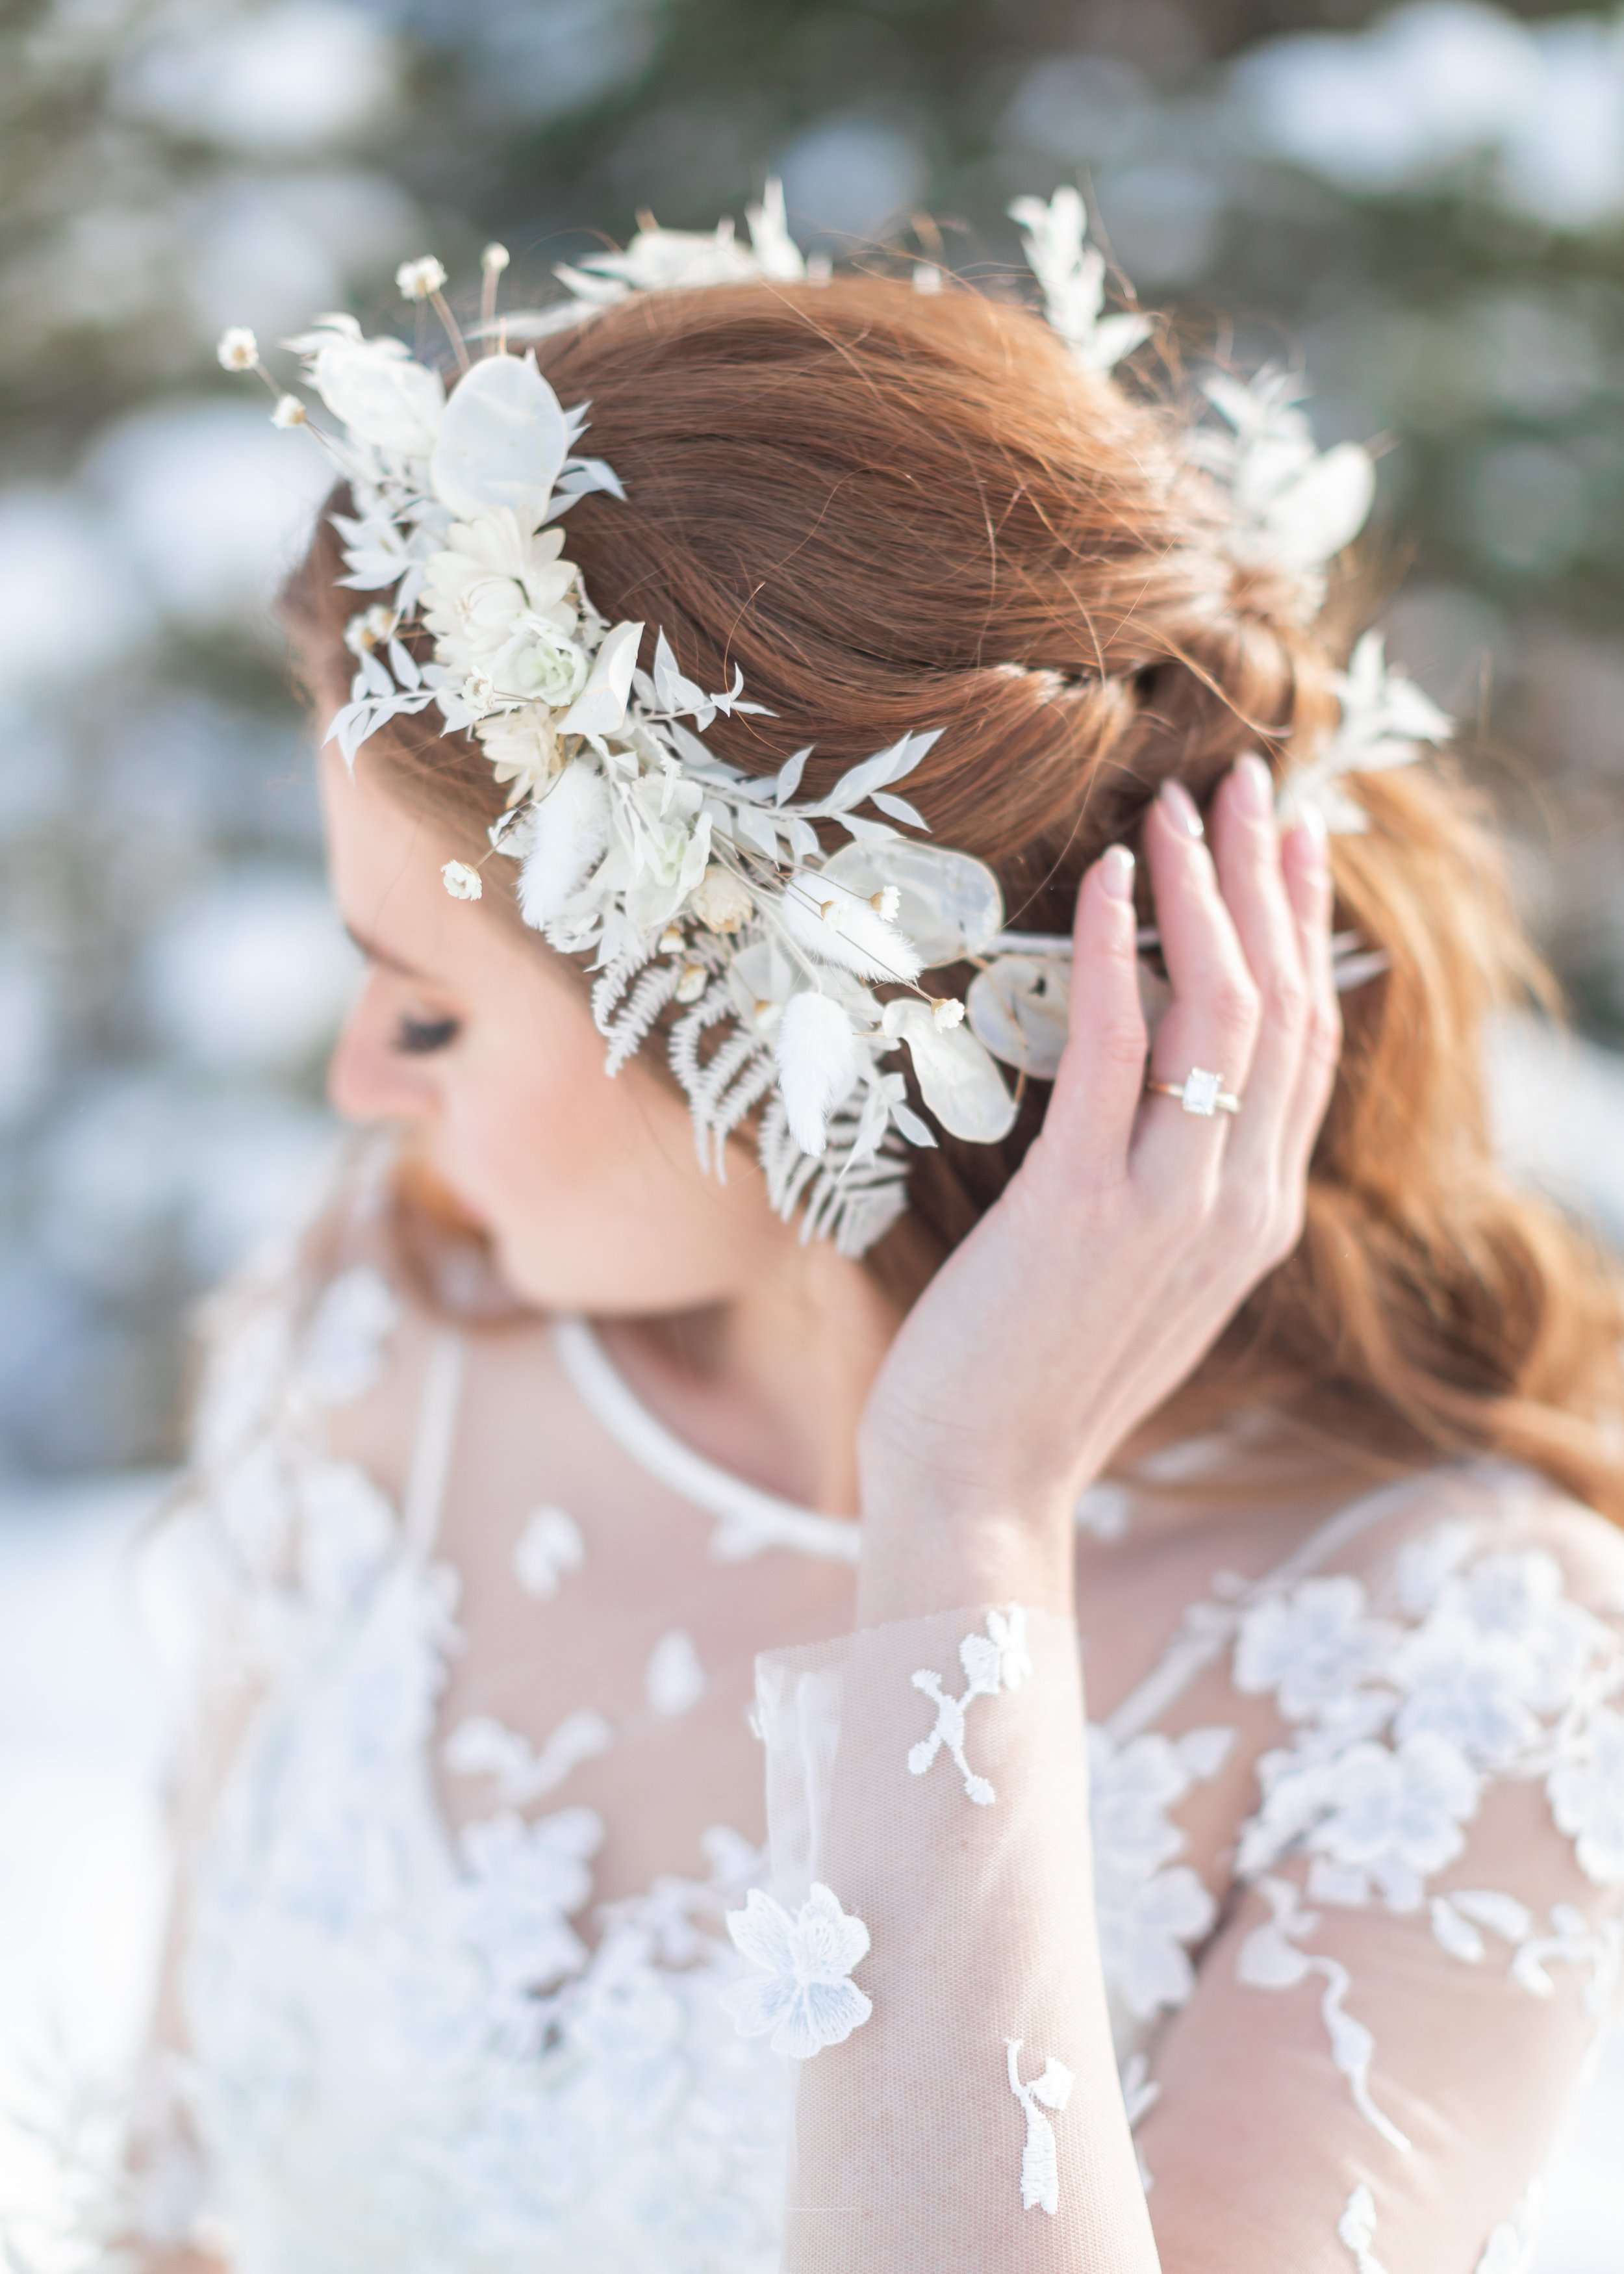  Savanna Richardson Photography captures a bride wearing a white floral wreath in her red hair. winter wedding bridal hair ideas floral headband #savannarichardsonphotography #utahvendor #utahweddingphotographer #MilleFleurDesign #Utahweddingdesigns 